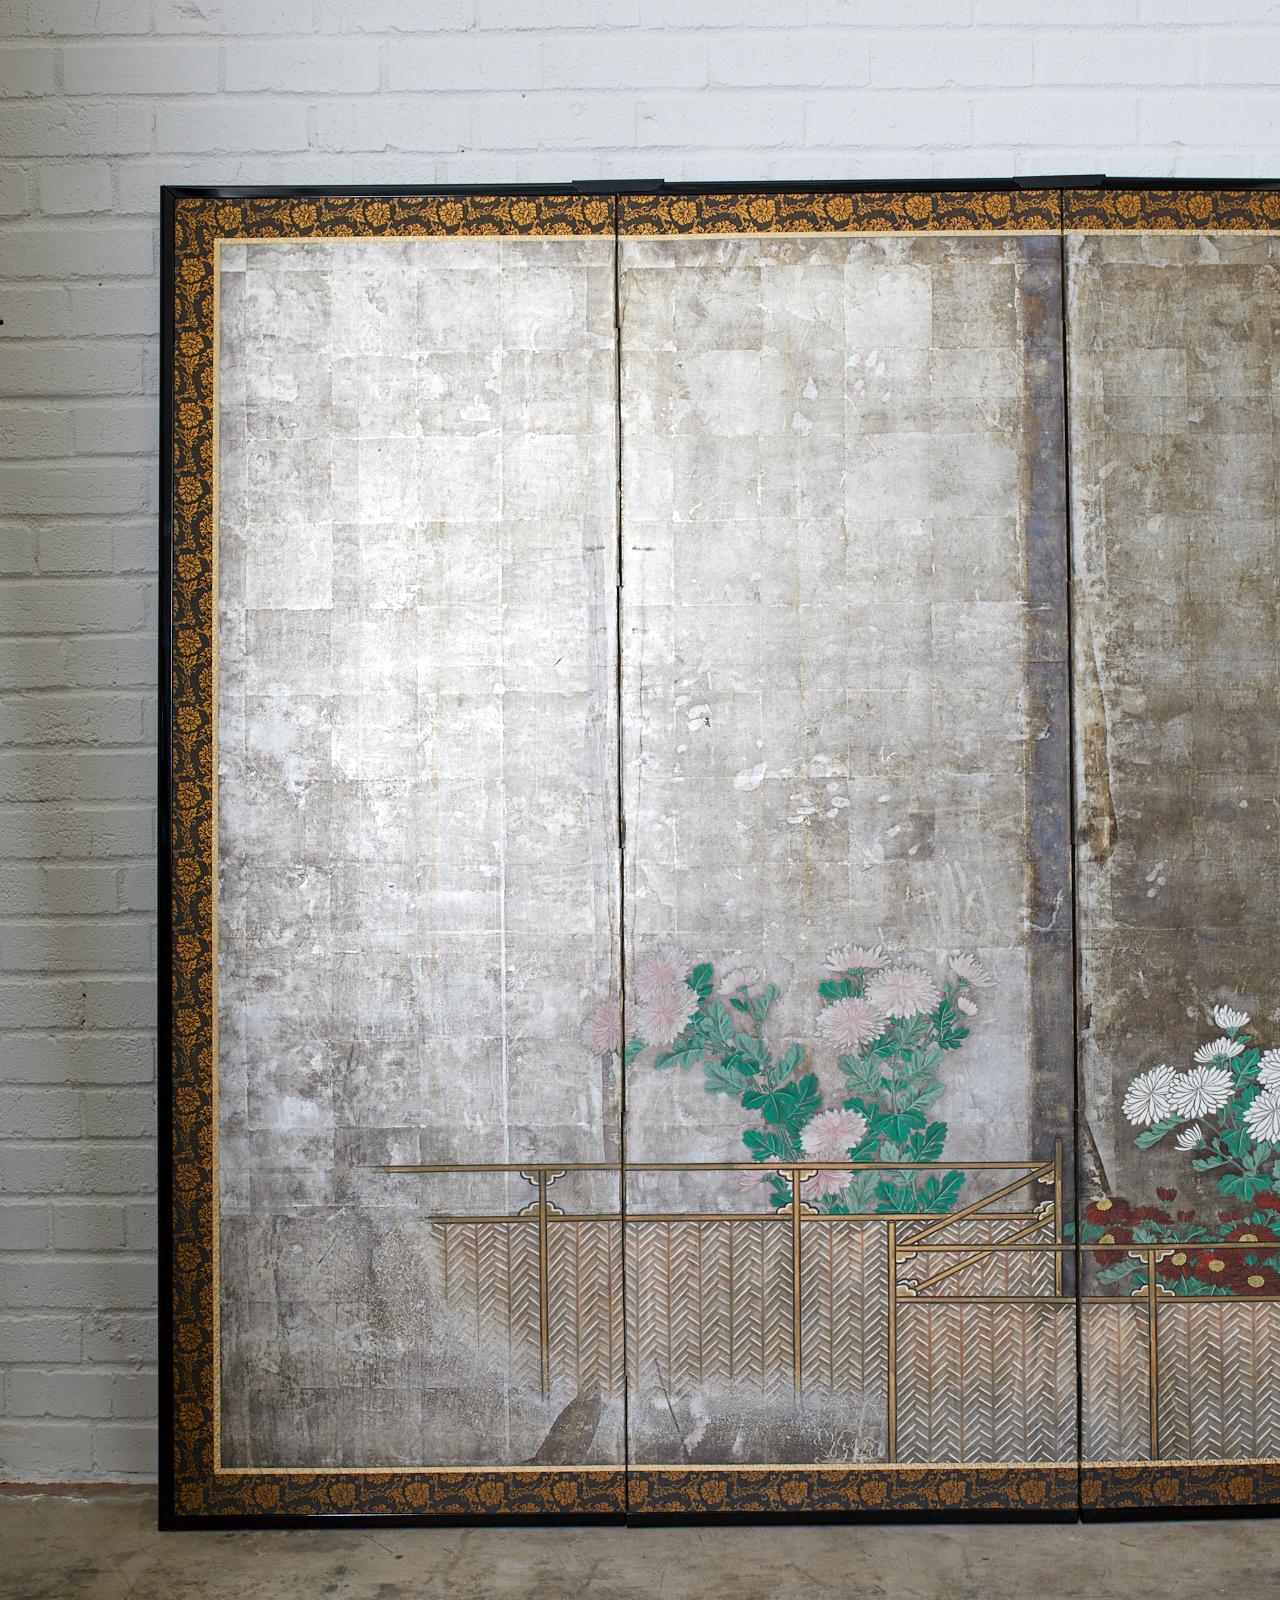 Remarkable pair of early 19th century Japanese late Edo period screens depicting summer chrysanthemums growing along a brushwood fence. Ink and color pigments over a dramatic silver leaf ground. Kano school influence with moriage flowers. The love